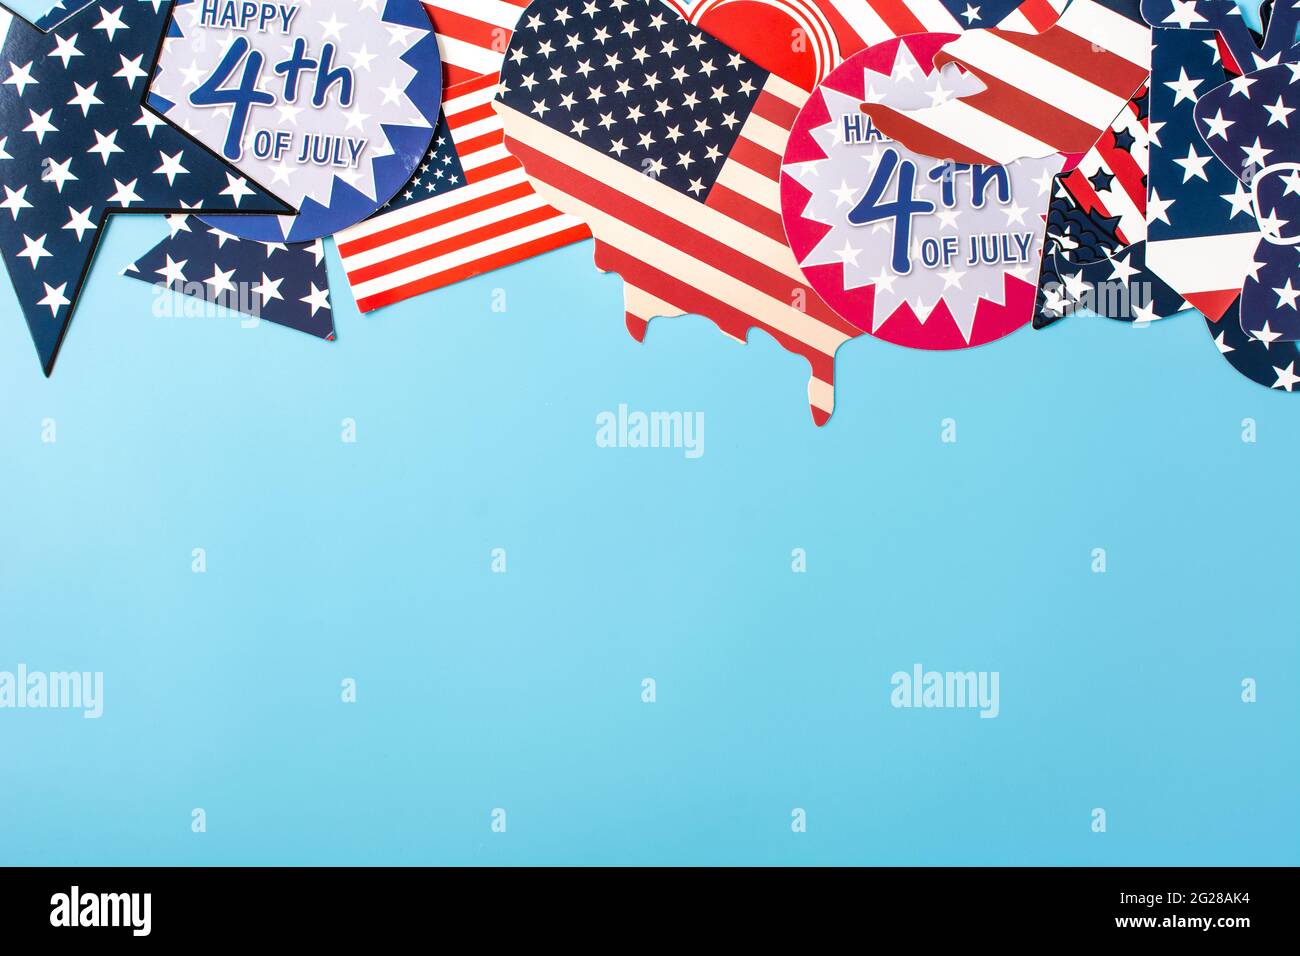 Happy 4th July ornament on blue background Stock Photo